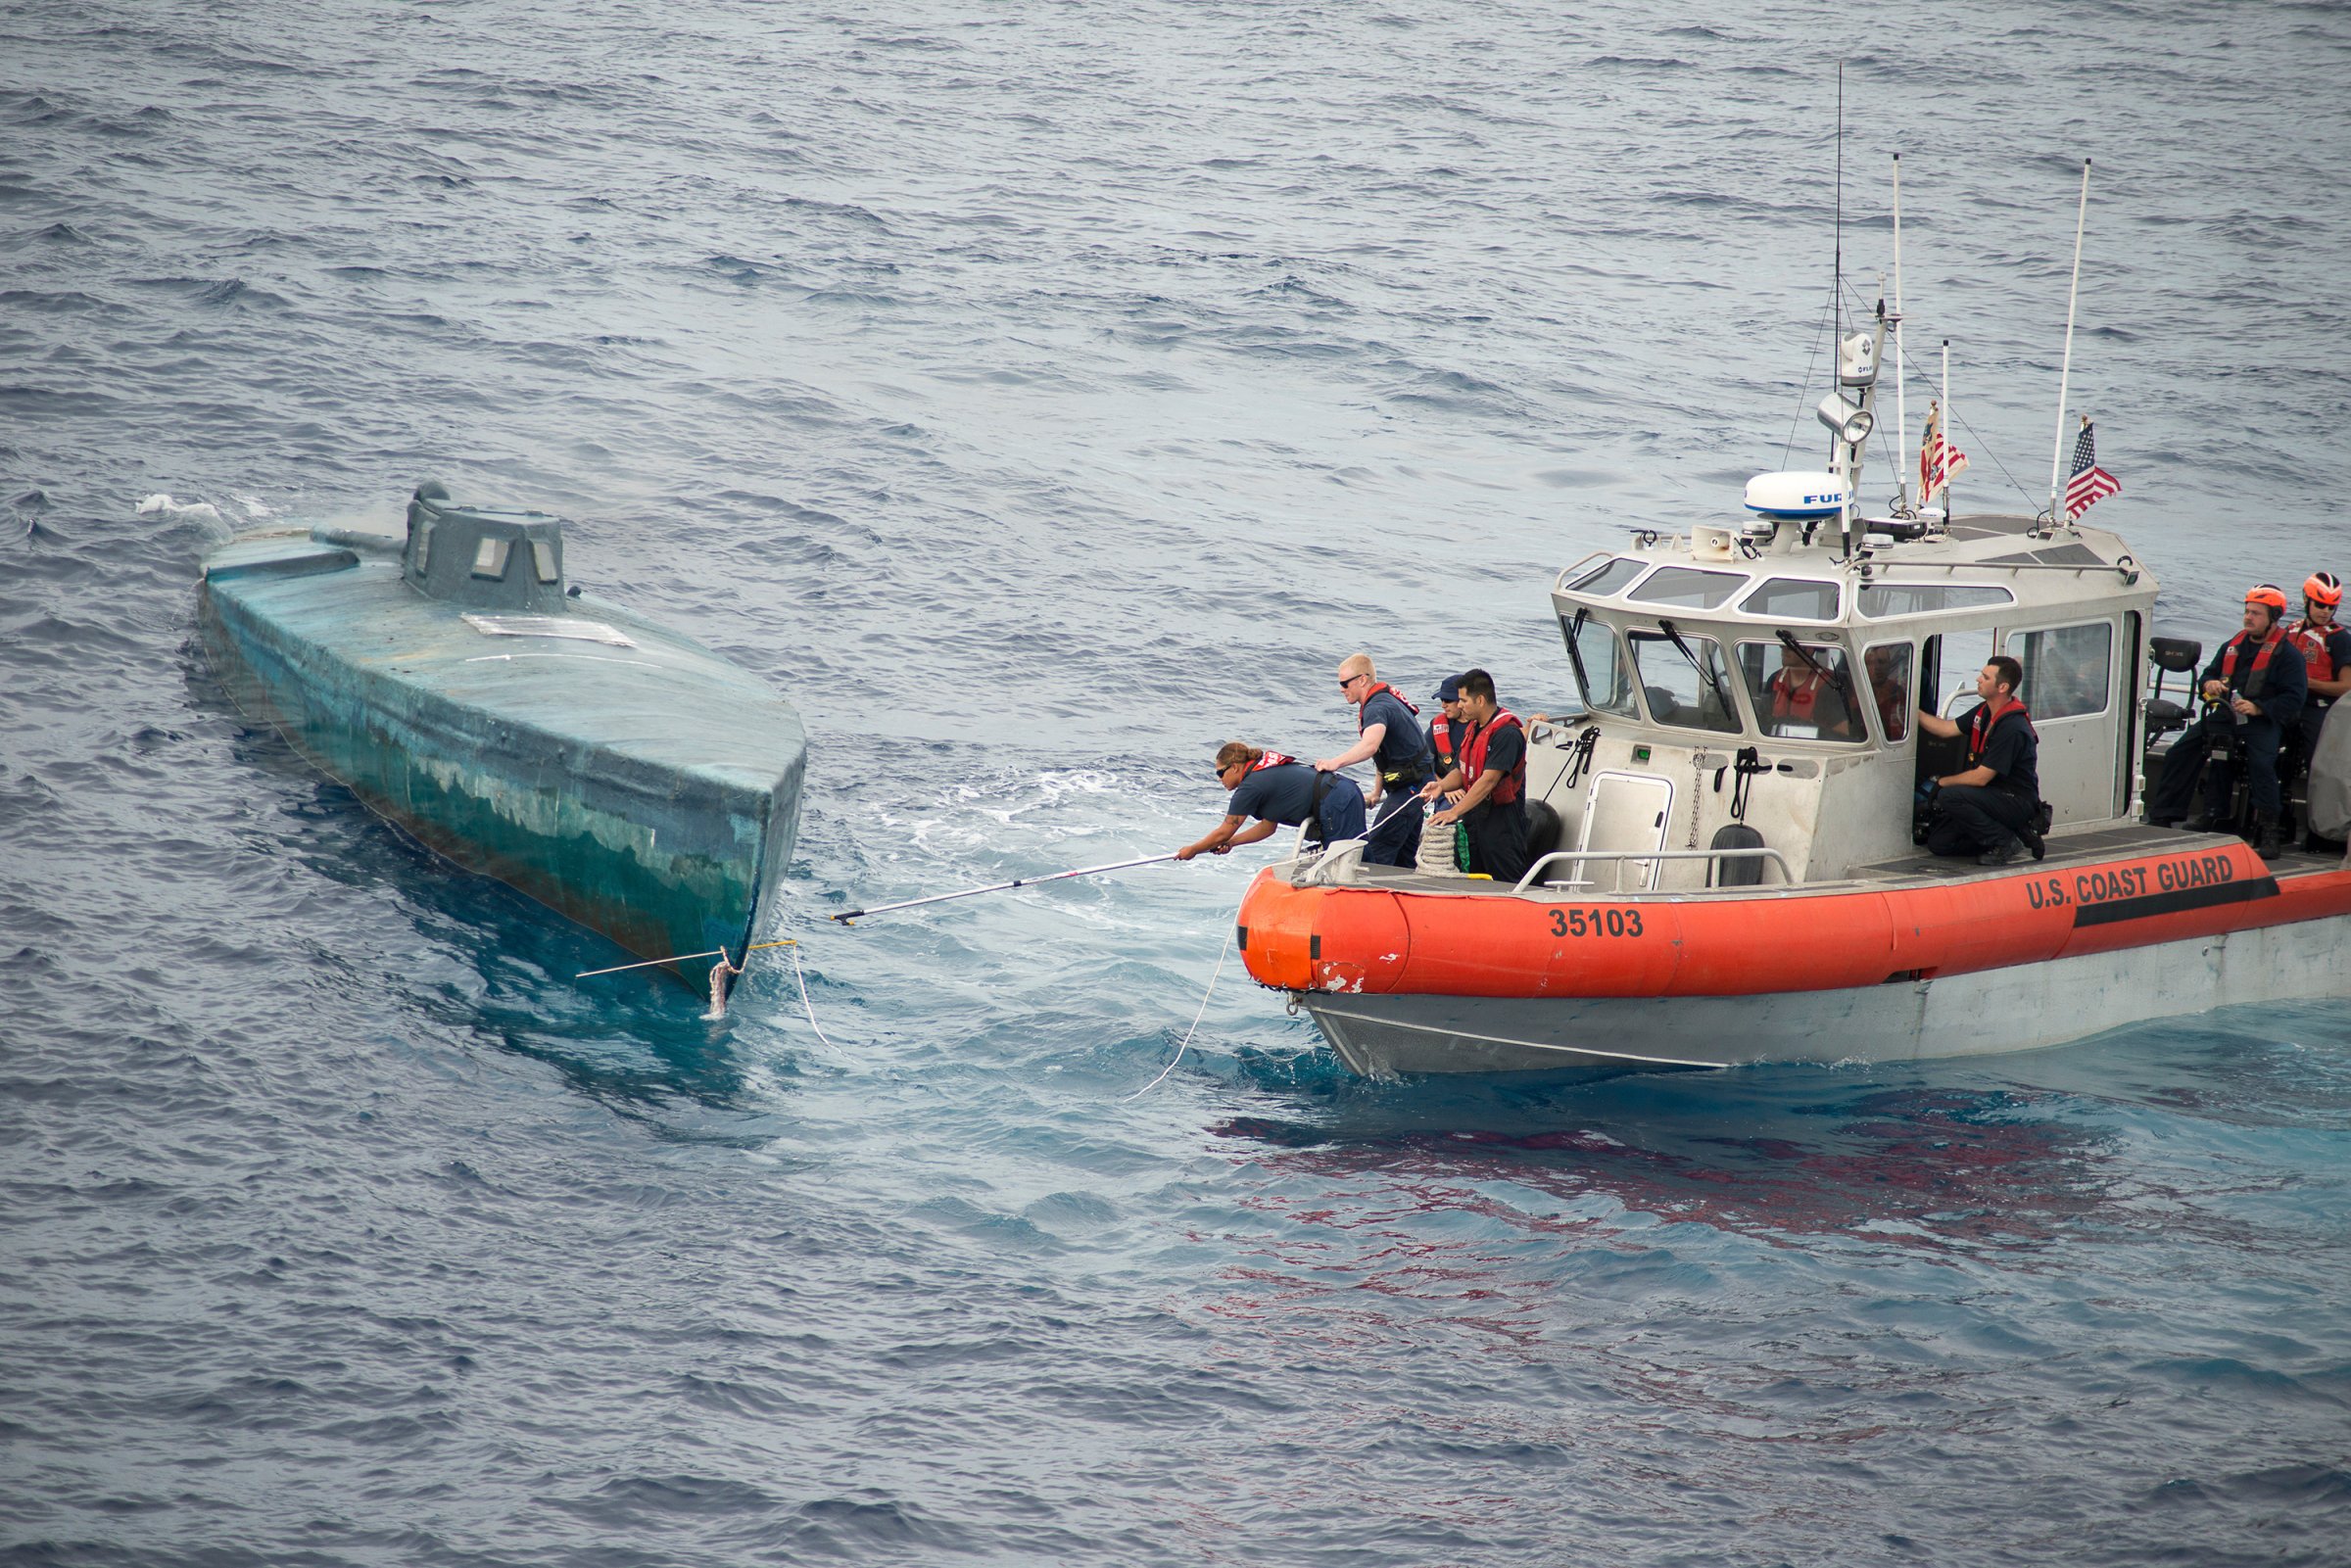 Crew from the U.S. Coast Guard Cutter Stratton stop a Self-Propelled Semi Submersible off the coast of Central America in this U.S. Coast Guard picture taken July 18, 2015 and released August 5, 2015.